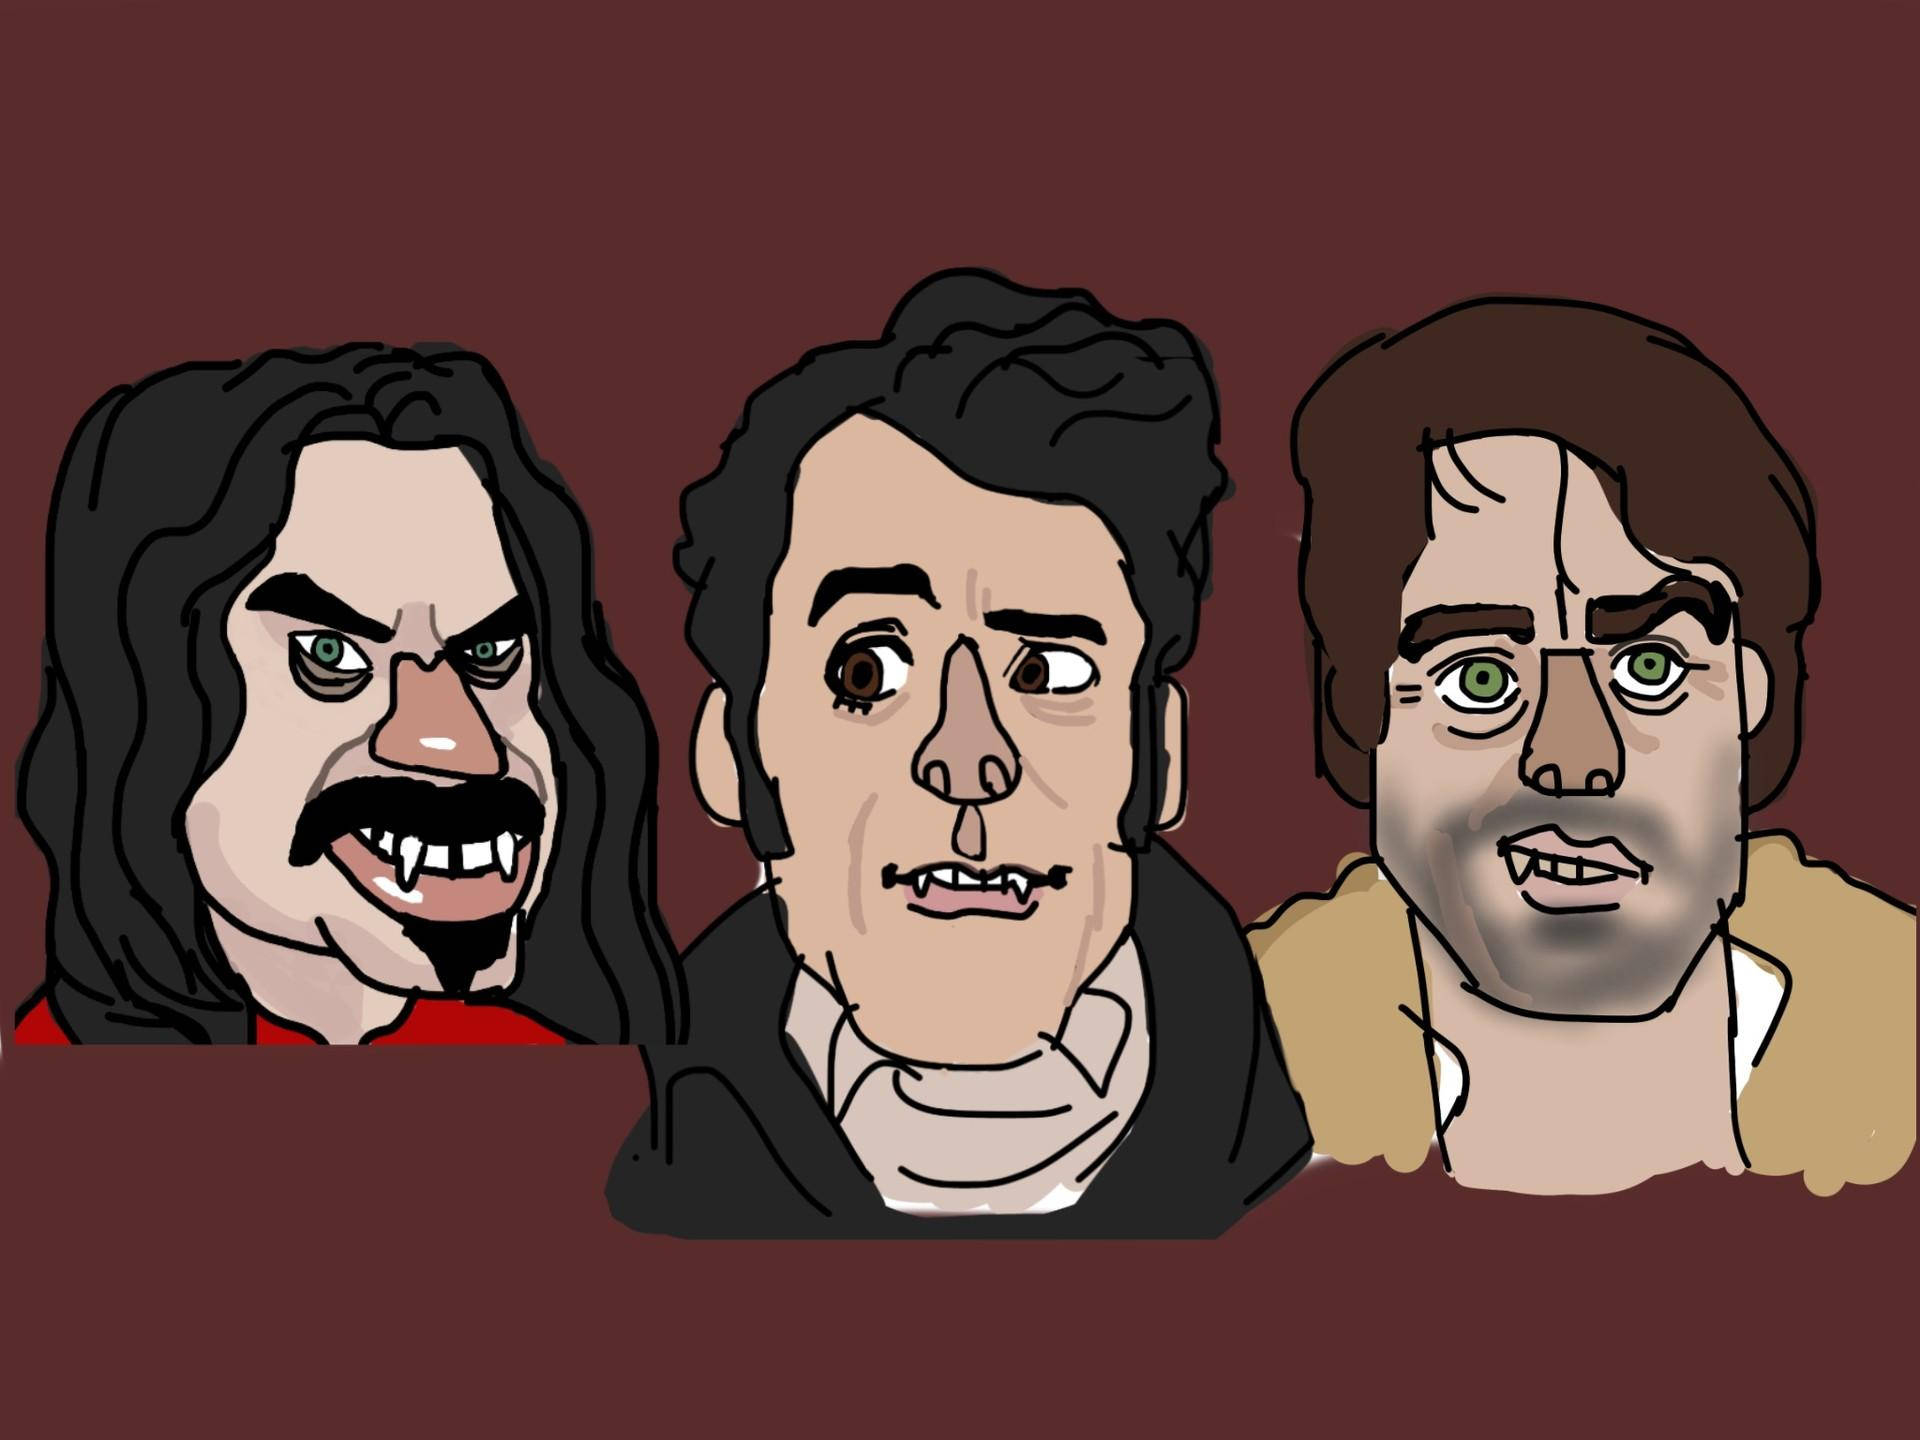 What We Do In The Shadows Digital Art